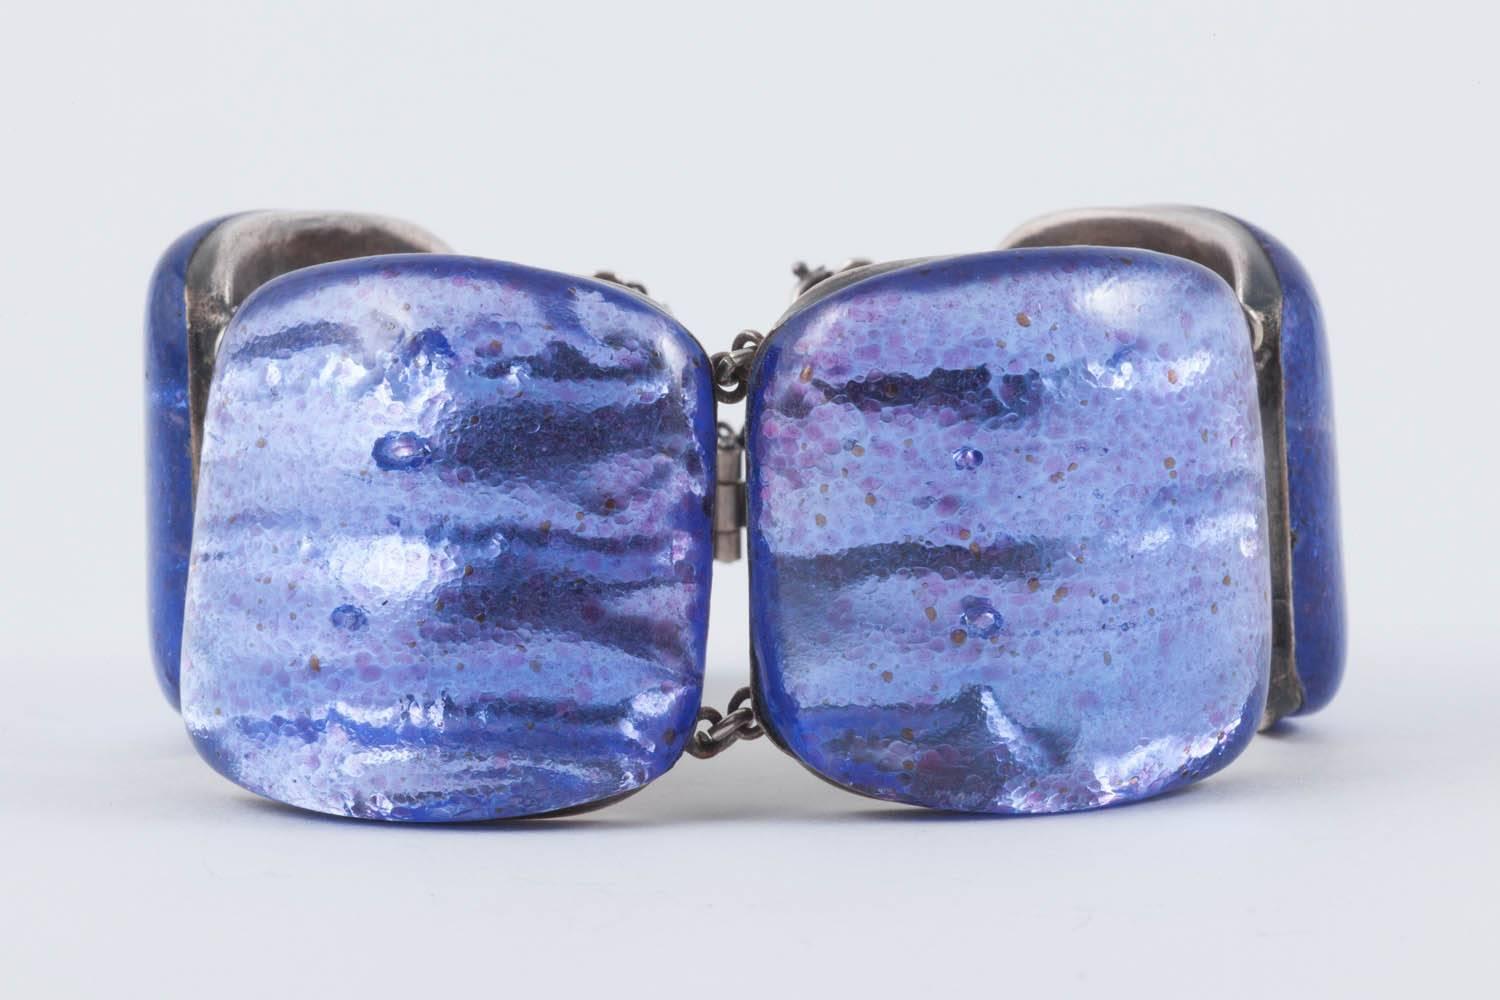 A stunning enamelled bracelet , handmade by Jacques Gautier, in a most striking and unusual colour, set in silver plated bronze, from the 1960s. With softly domed panels in a mirrored lilac enamel, with deep purple specks within the enamel, giving